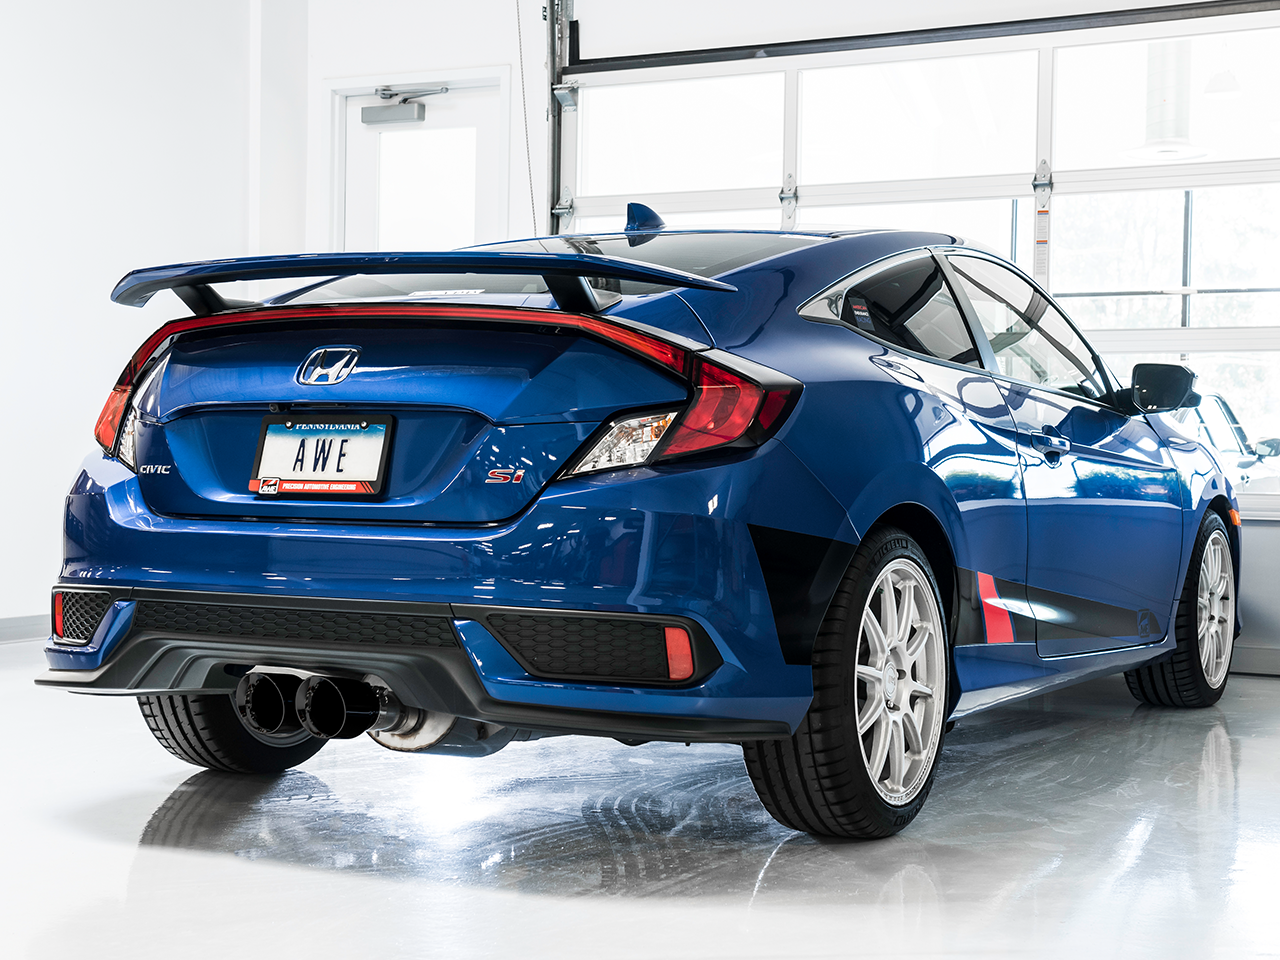 AWE Exhaust Suite for the 10th Gen Civic Si